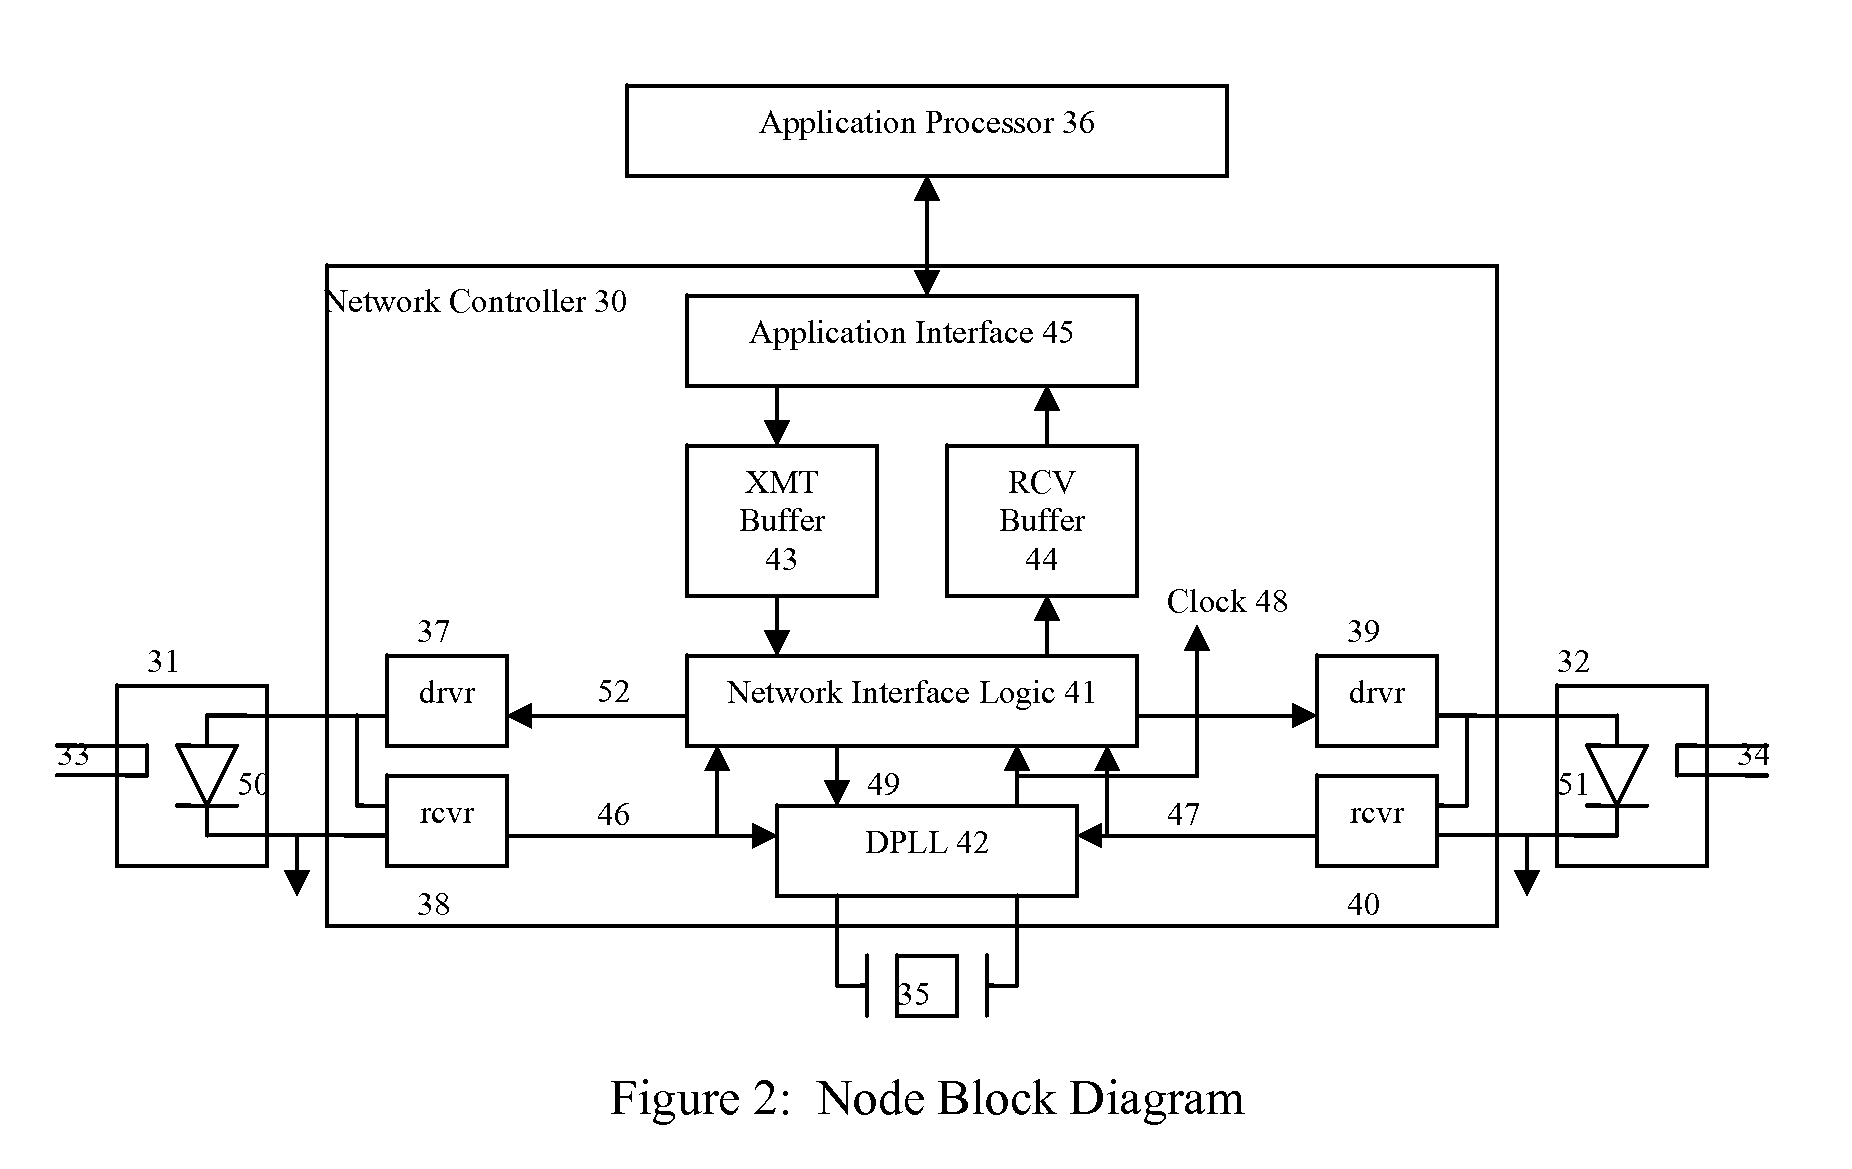 Fault tolerant network utilizing bi-directional point-to-point communications links between nodes